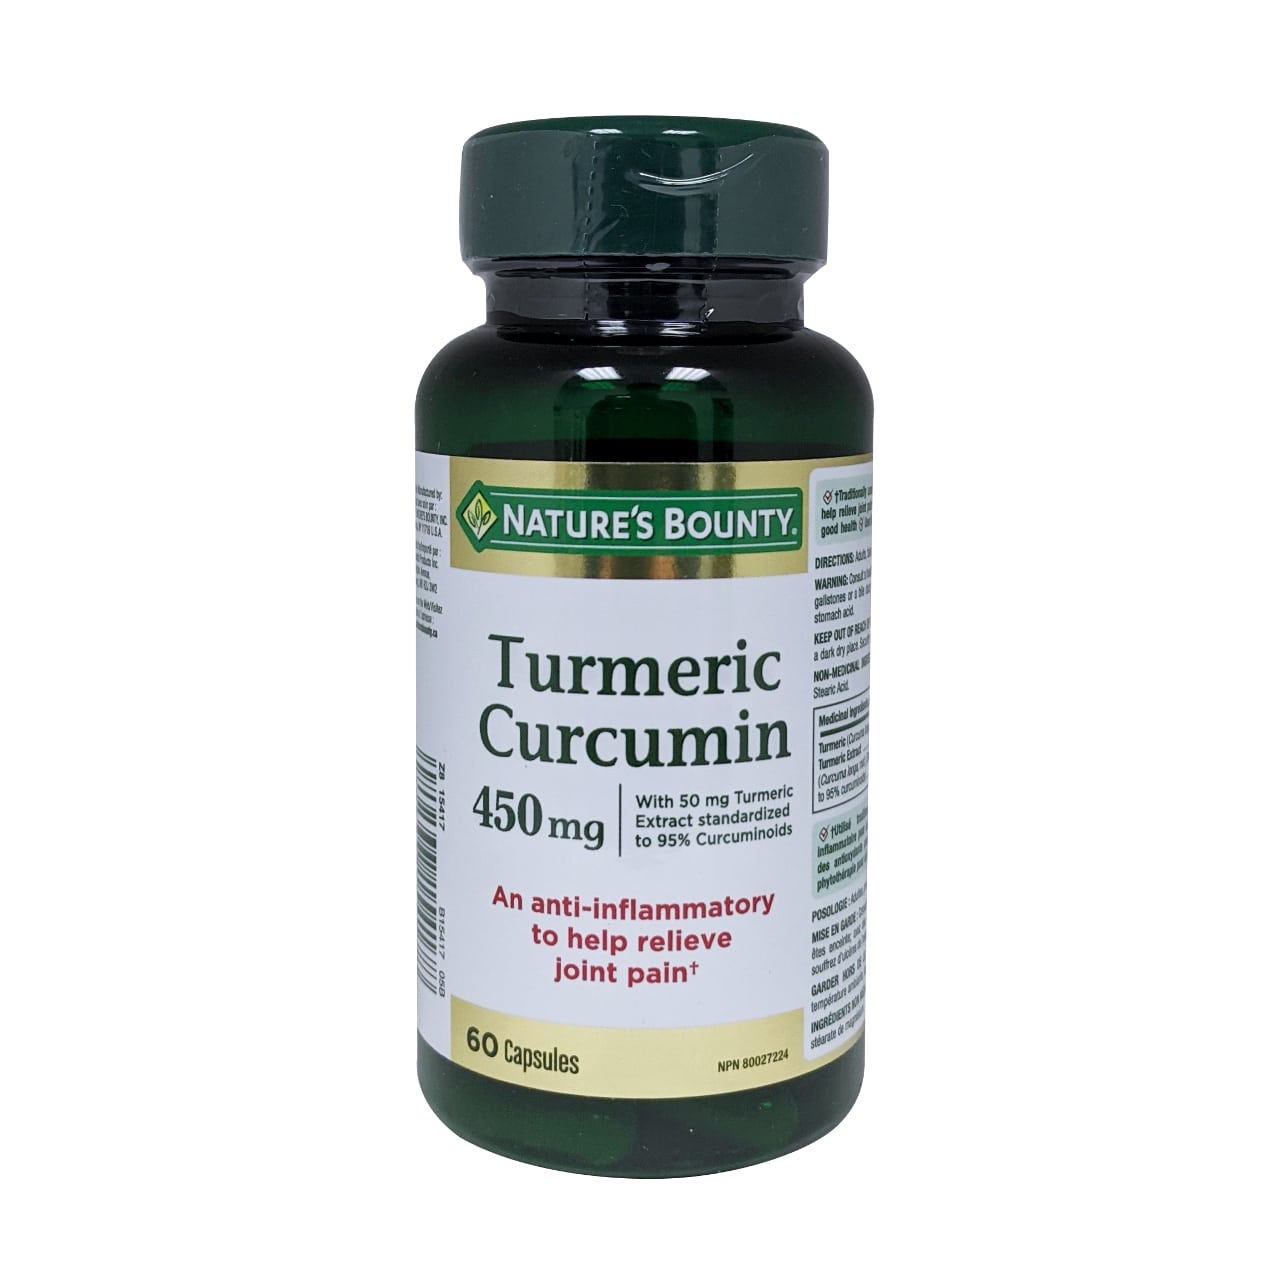 Product label for Nature's Bounty Turmeric Circumin 450mg in English